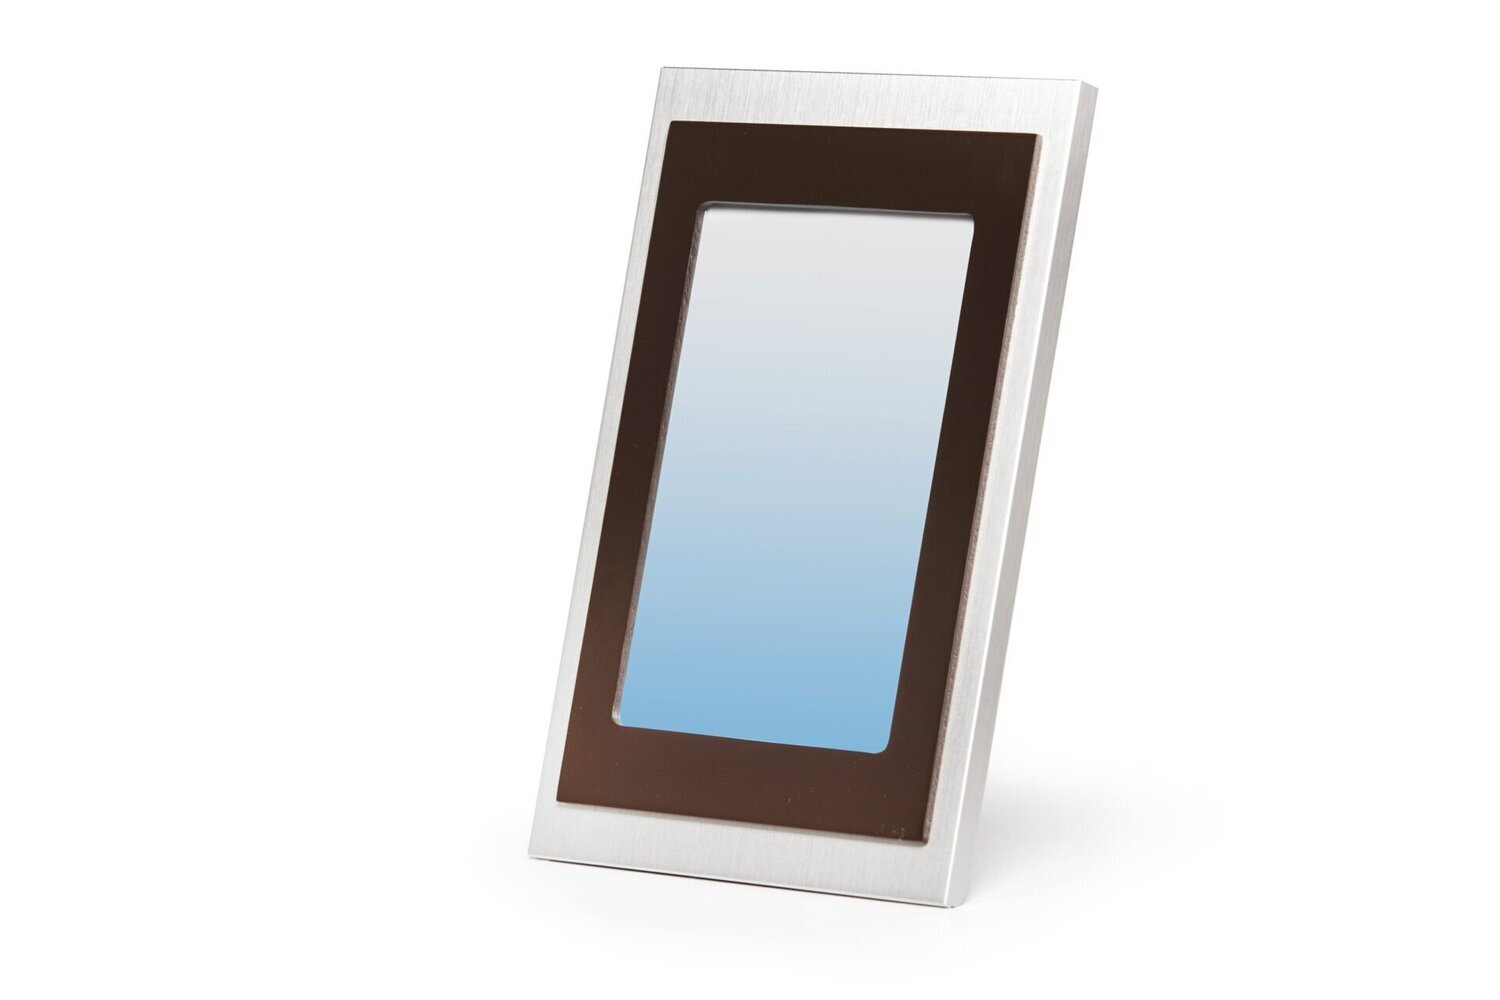 Silver and wood frame Futura model